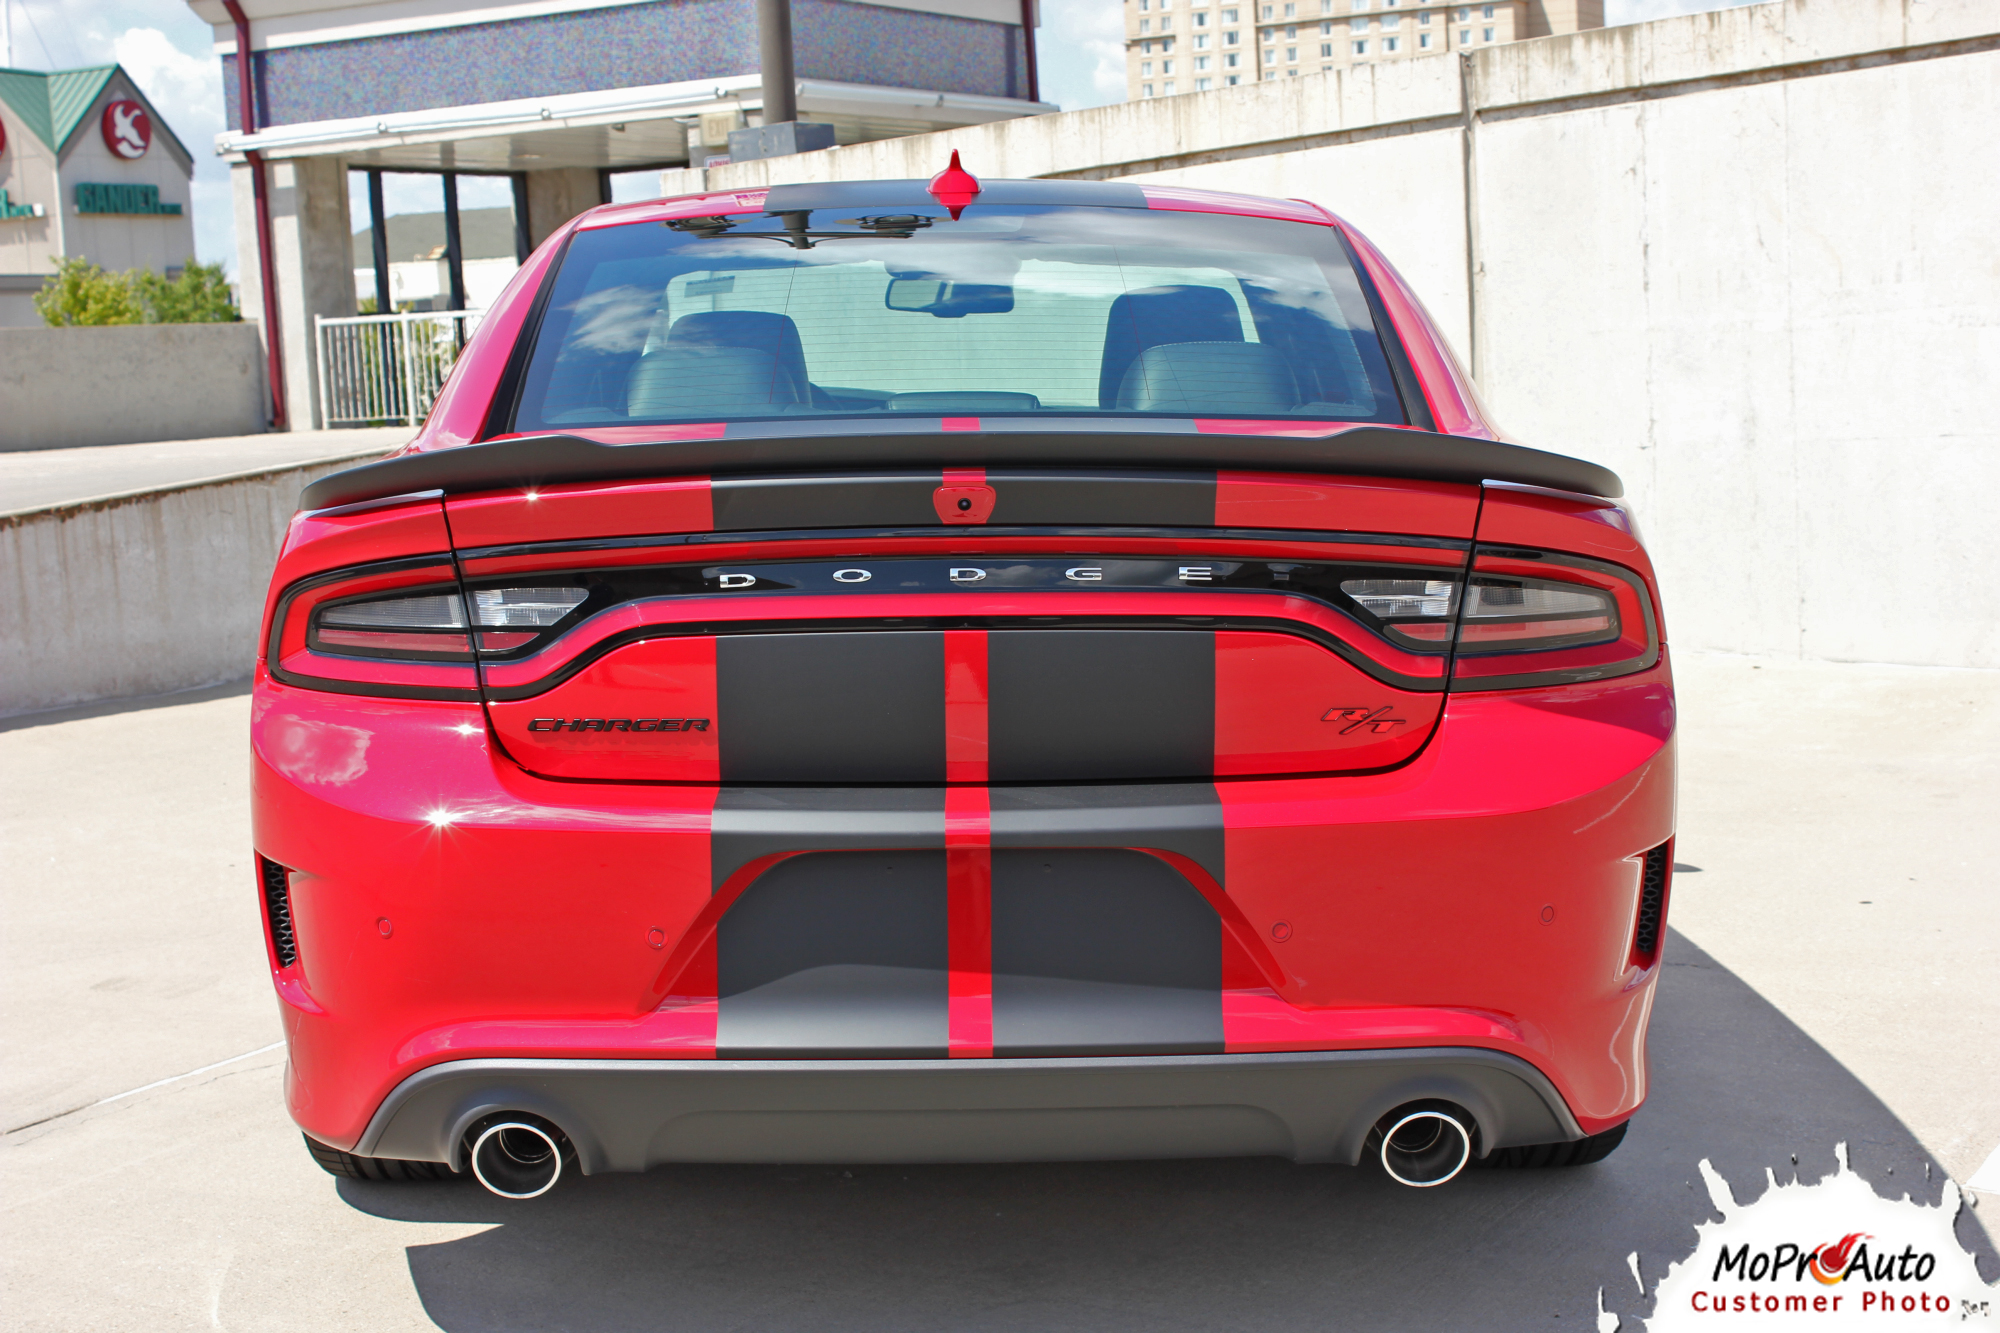 2015, 2016, 2017, 2018, 2019, 2020, 2021, 2022, 2023 RT SCAT PACK SRT 392 HELLCAT Rally Racing Stripes Dodge Charger Vinyl Graphics, Striping and Decals Set